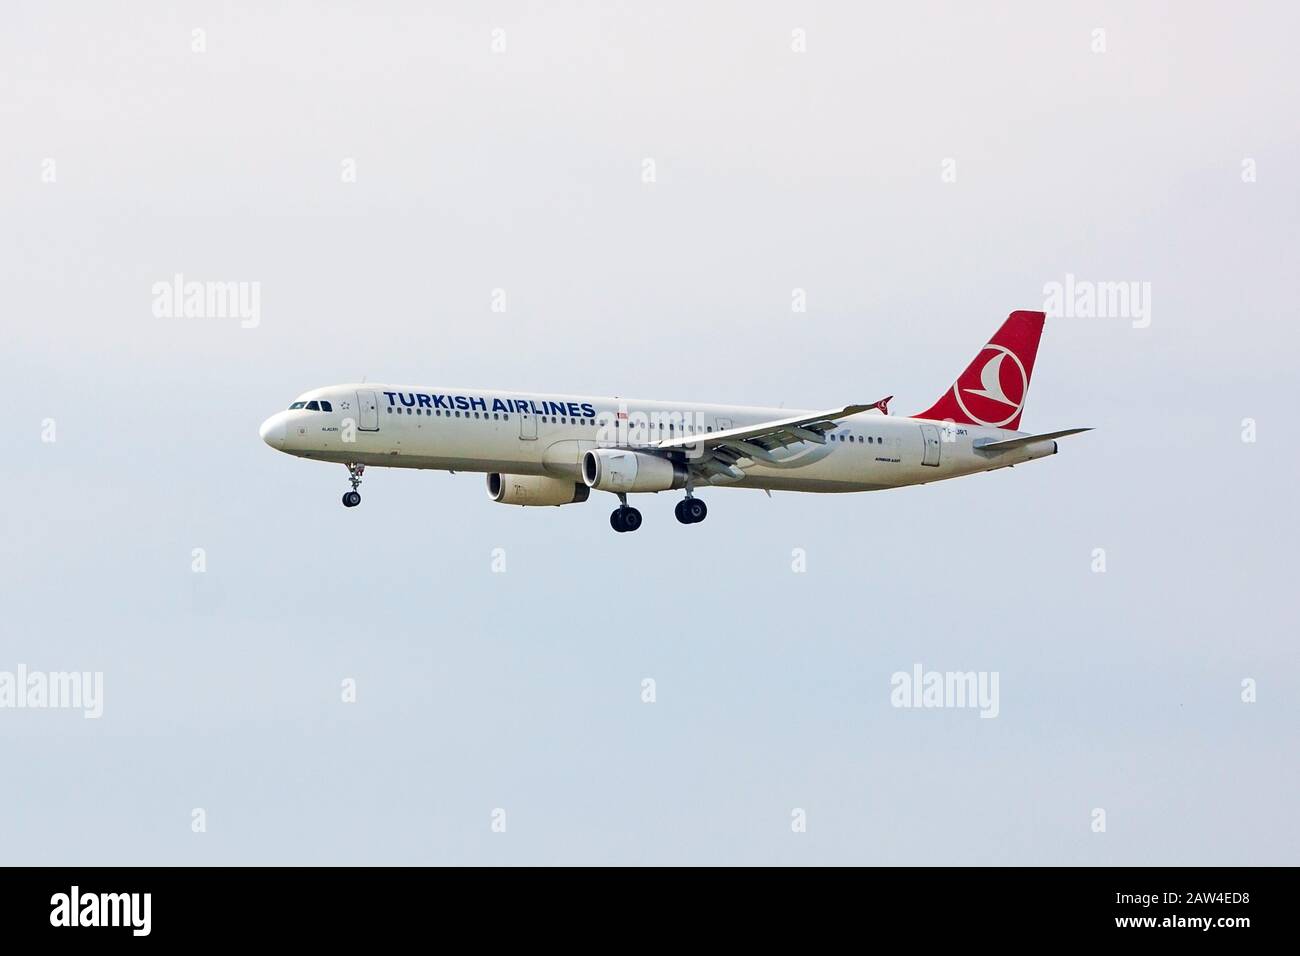 Stuttgart, Germany - May 06, 2017: Turkish Airlines Airbus A321 airplane during landing at airport Stuttgart Stock Photo